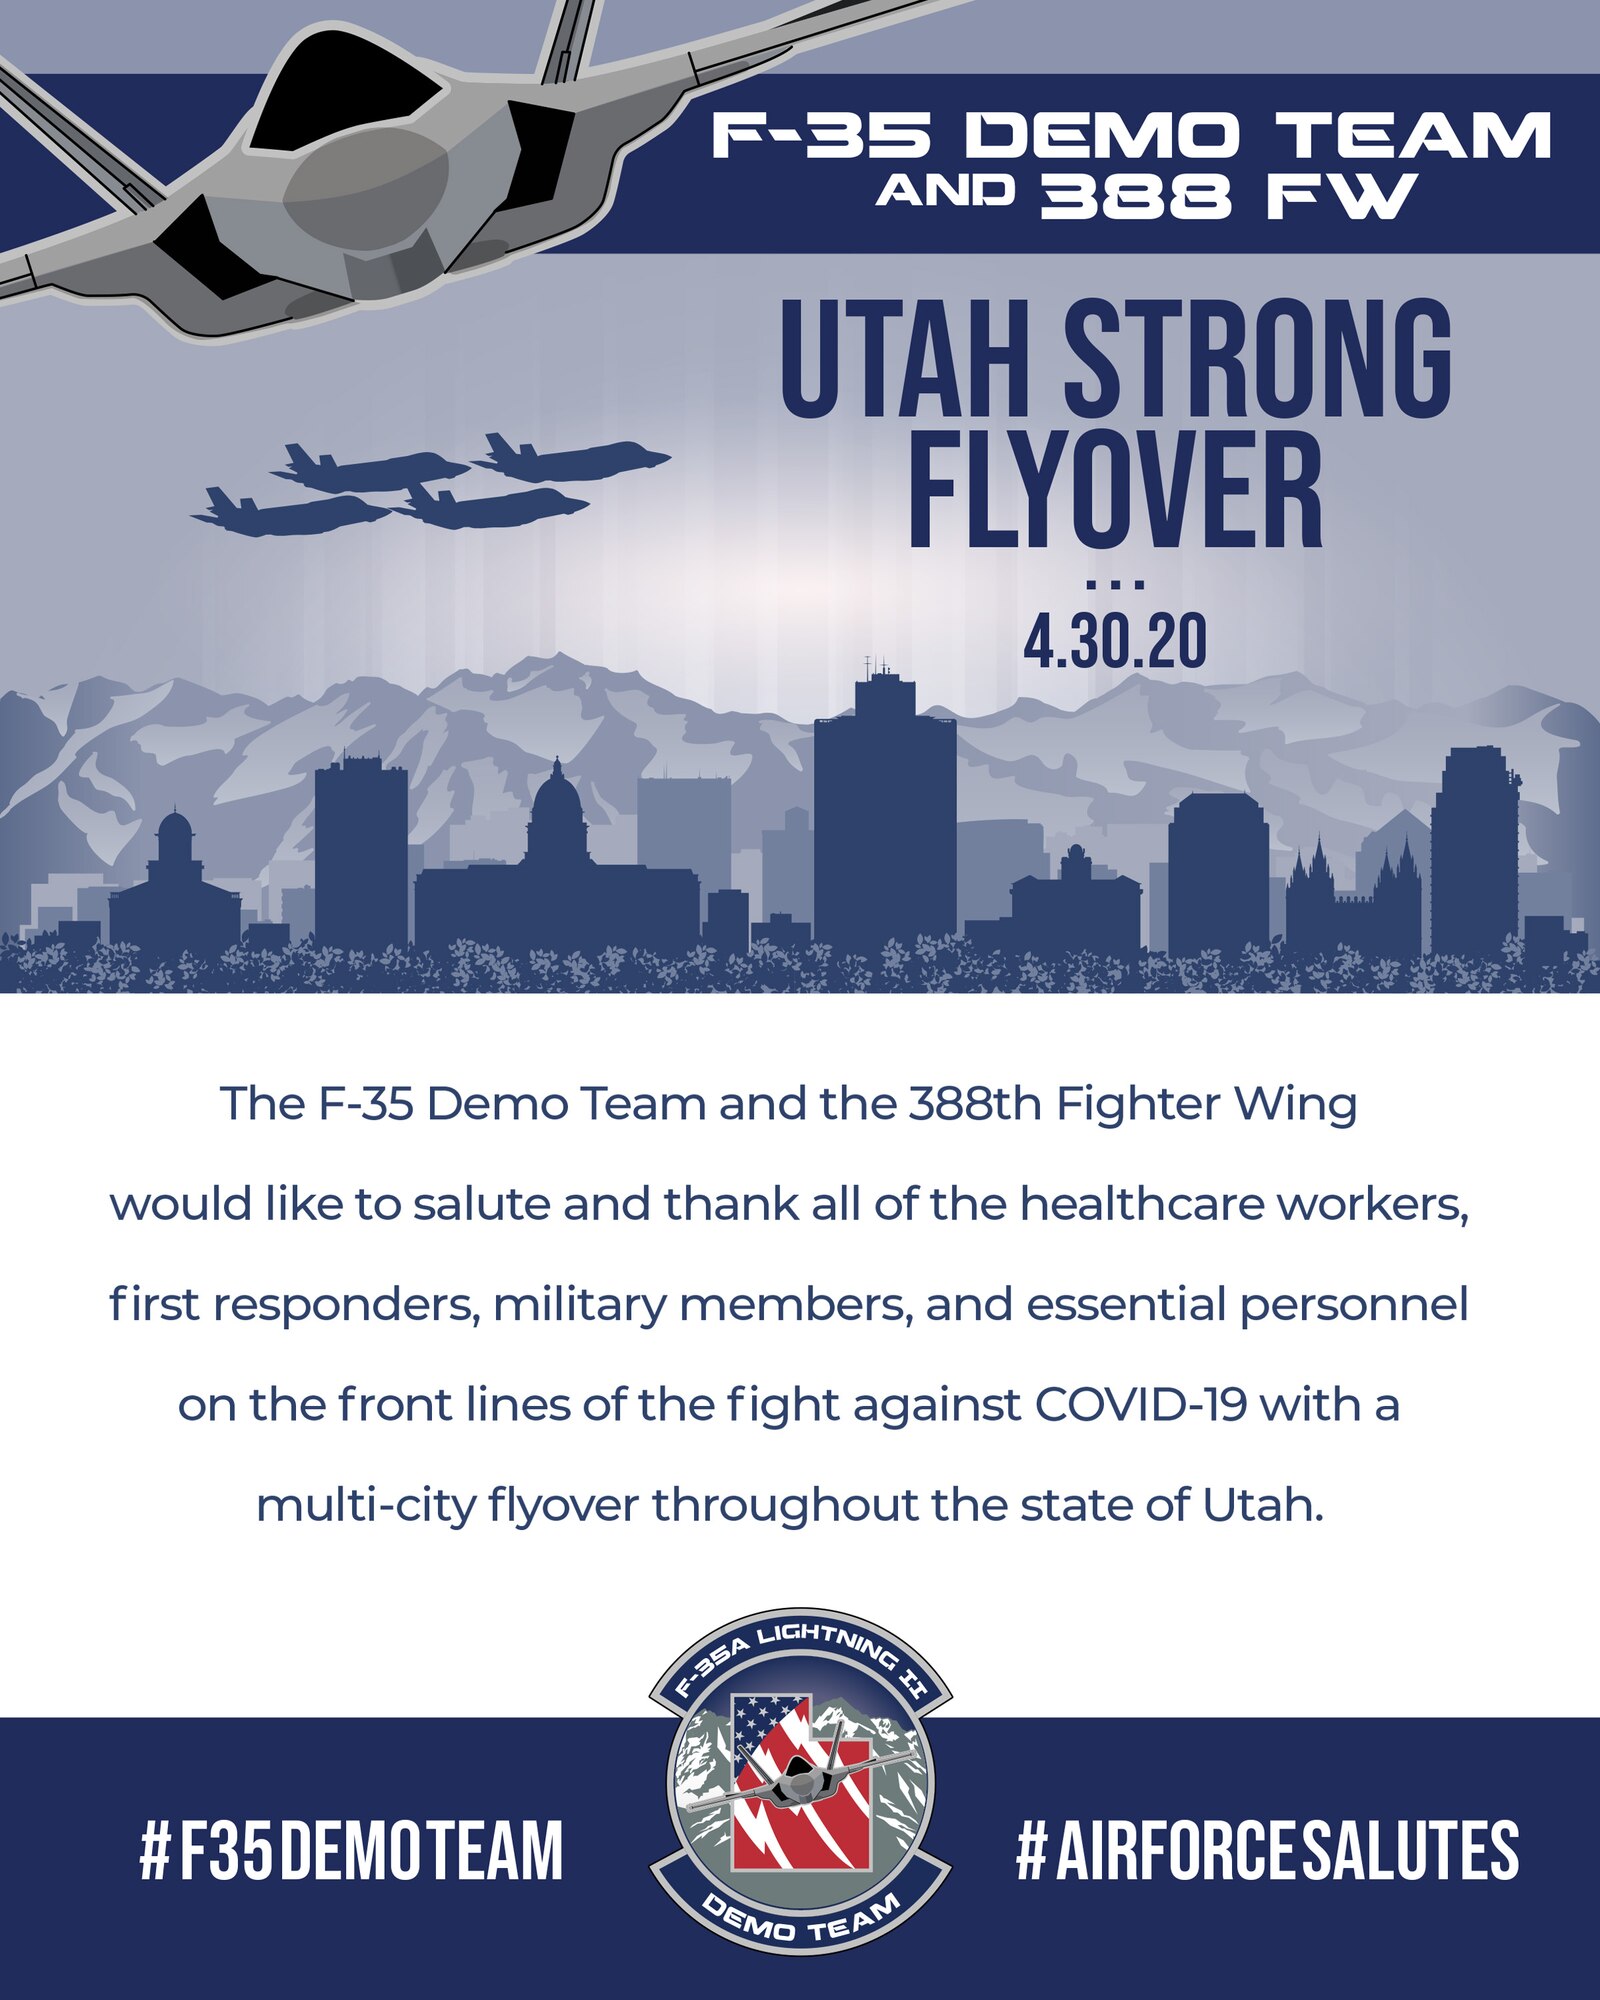 A graphic detailing the announcement of the 2020 F-35 Demo Team #UtahStrong Flyover.